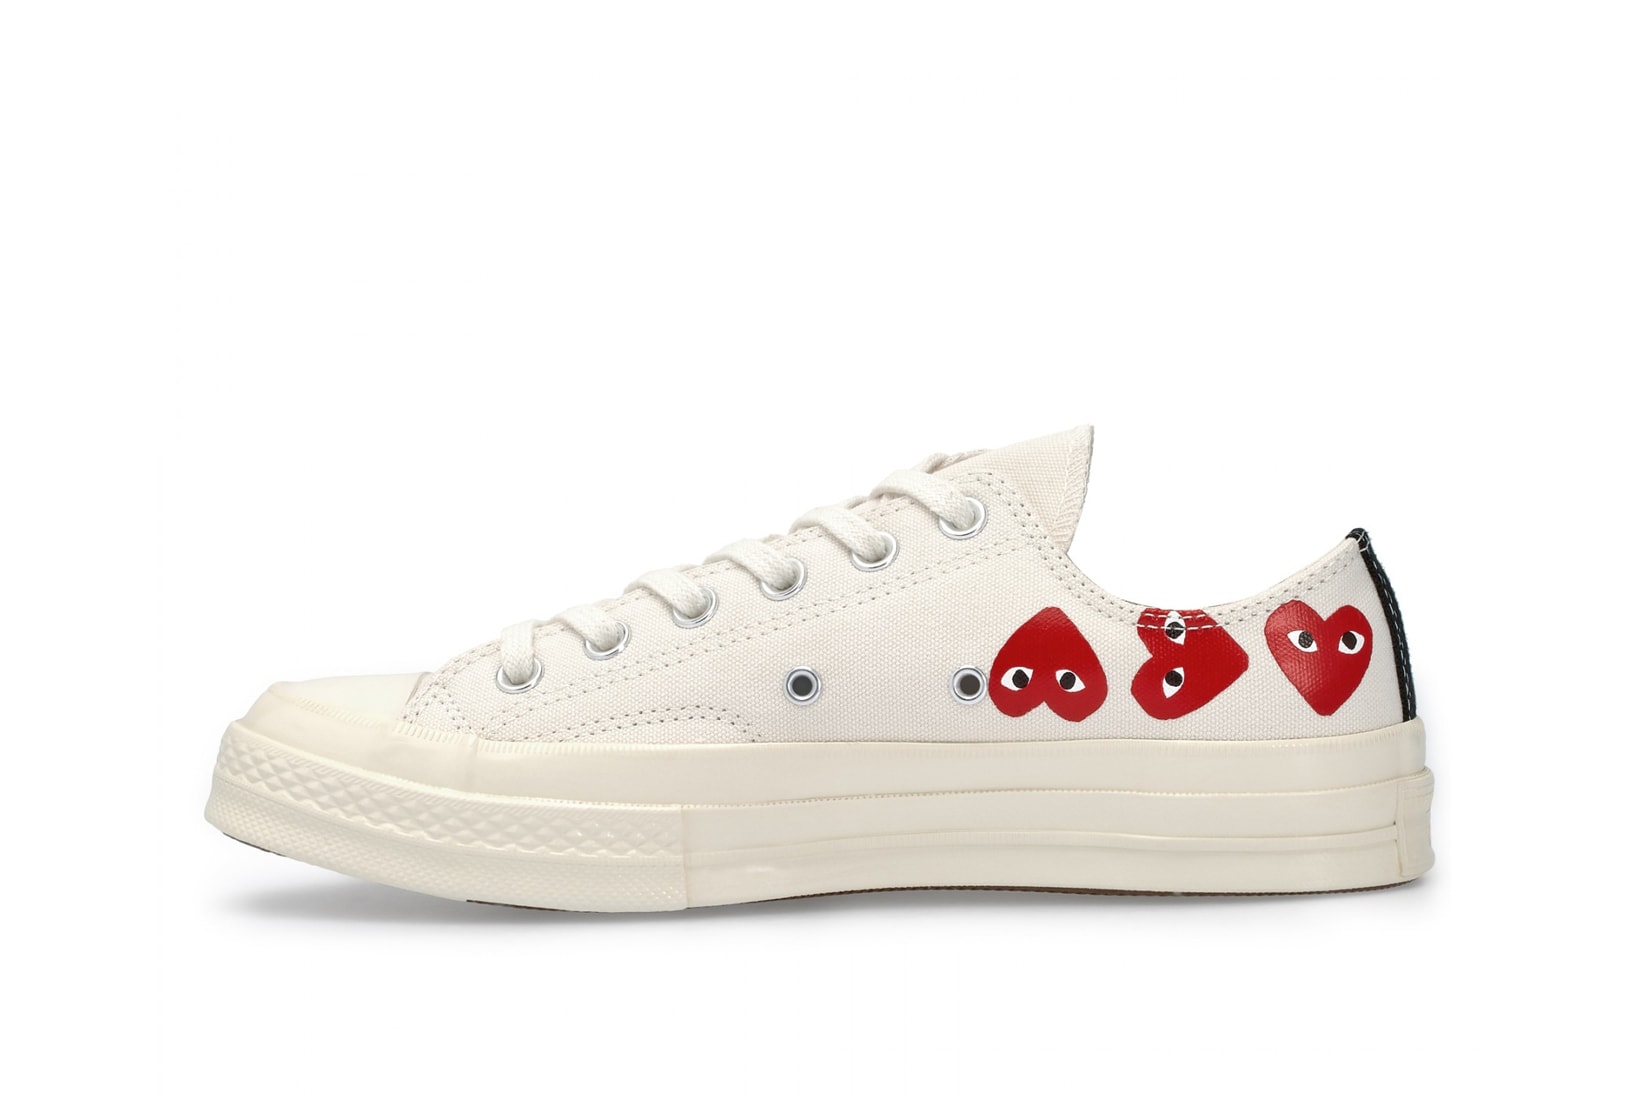 COMME des GARCONS x Converse All Star Low Top White